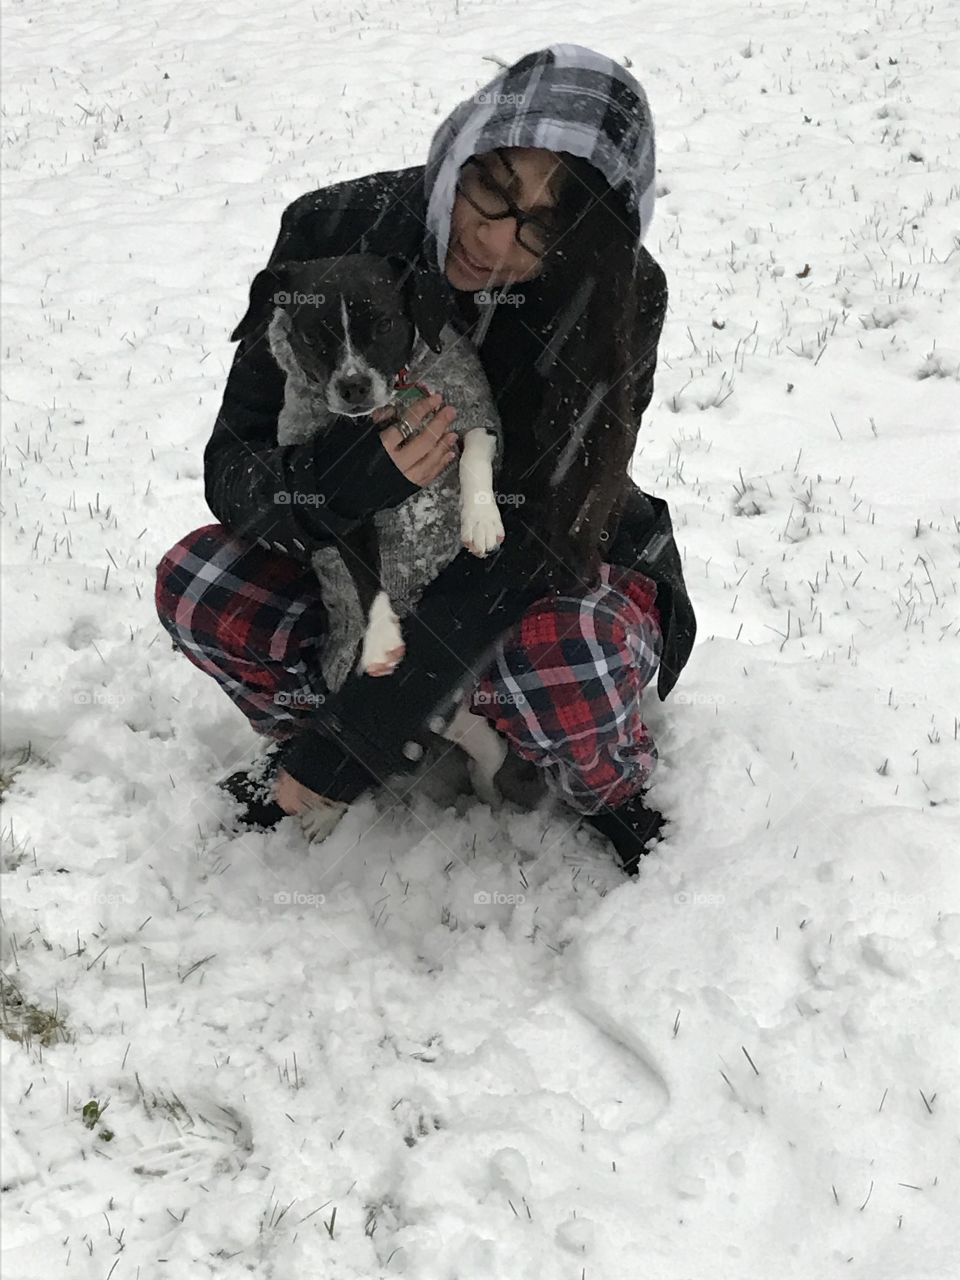 Snow day fun! An adorable puppy I’m a sweater, bright flannel, and a light snowfall. 